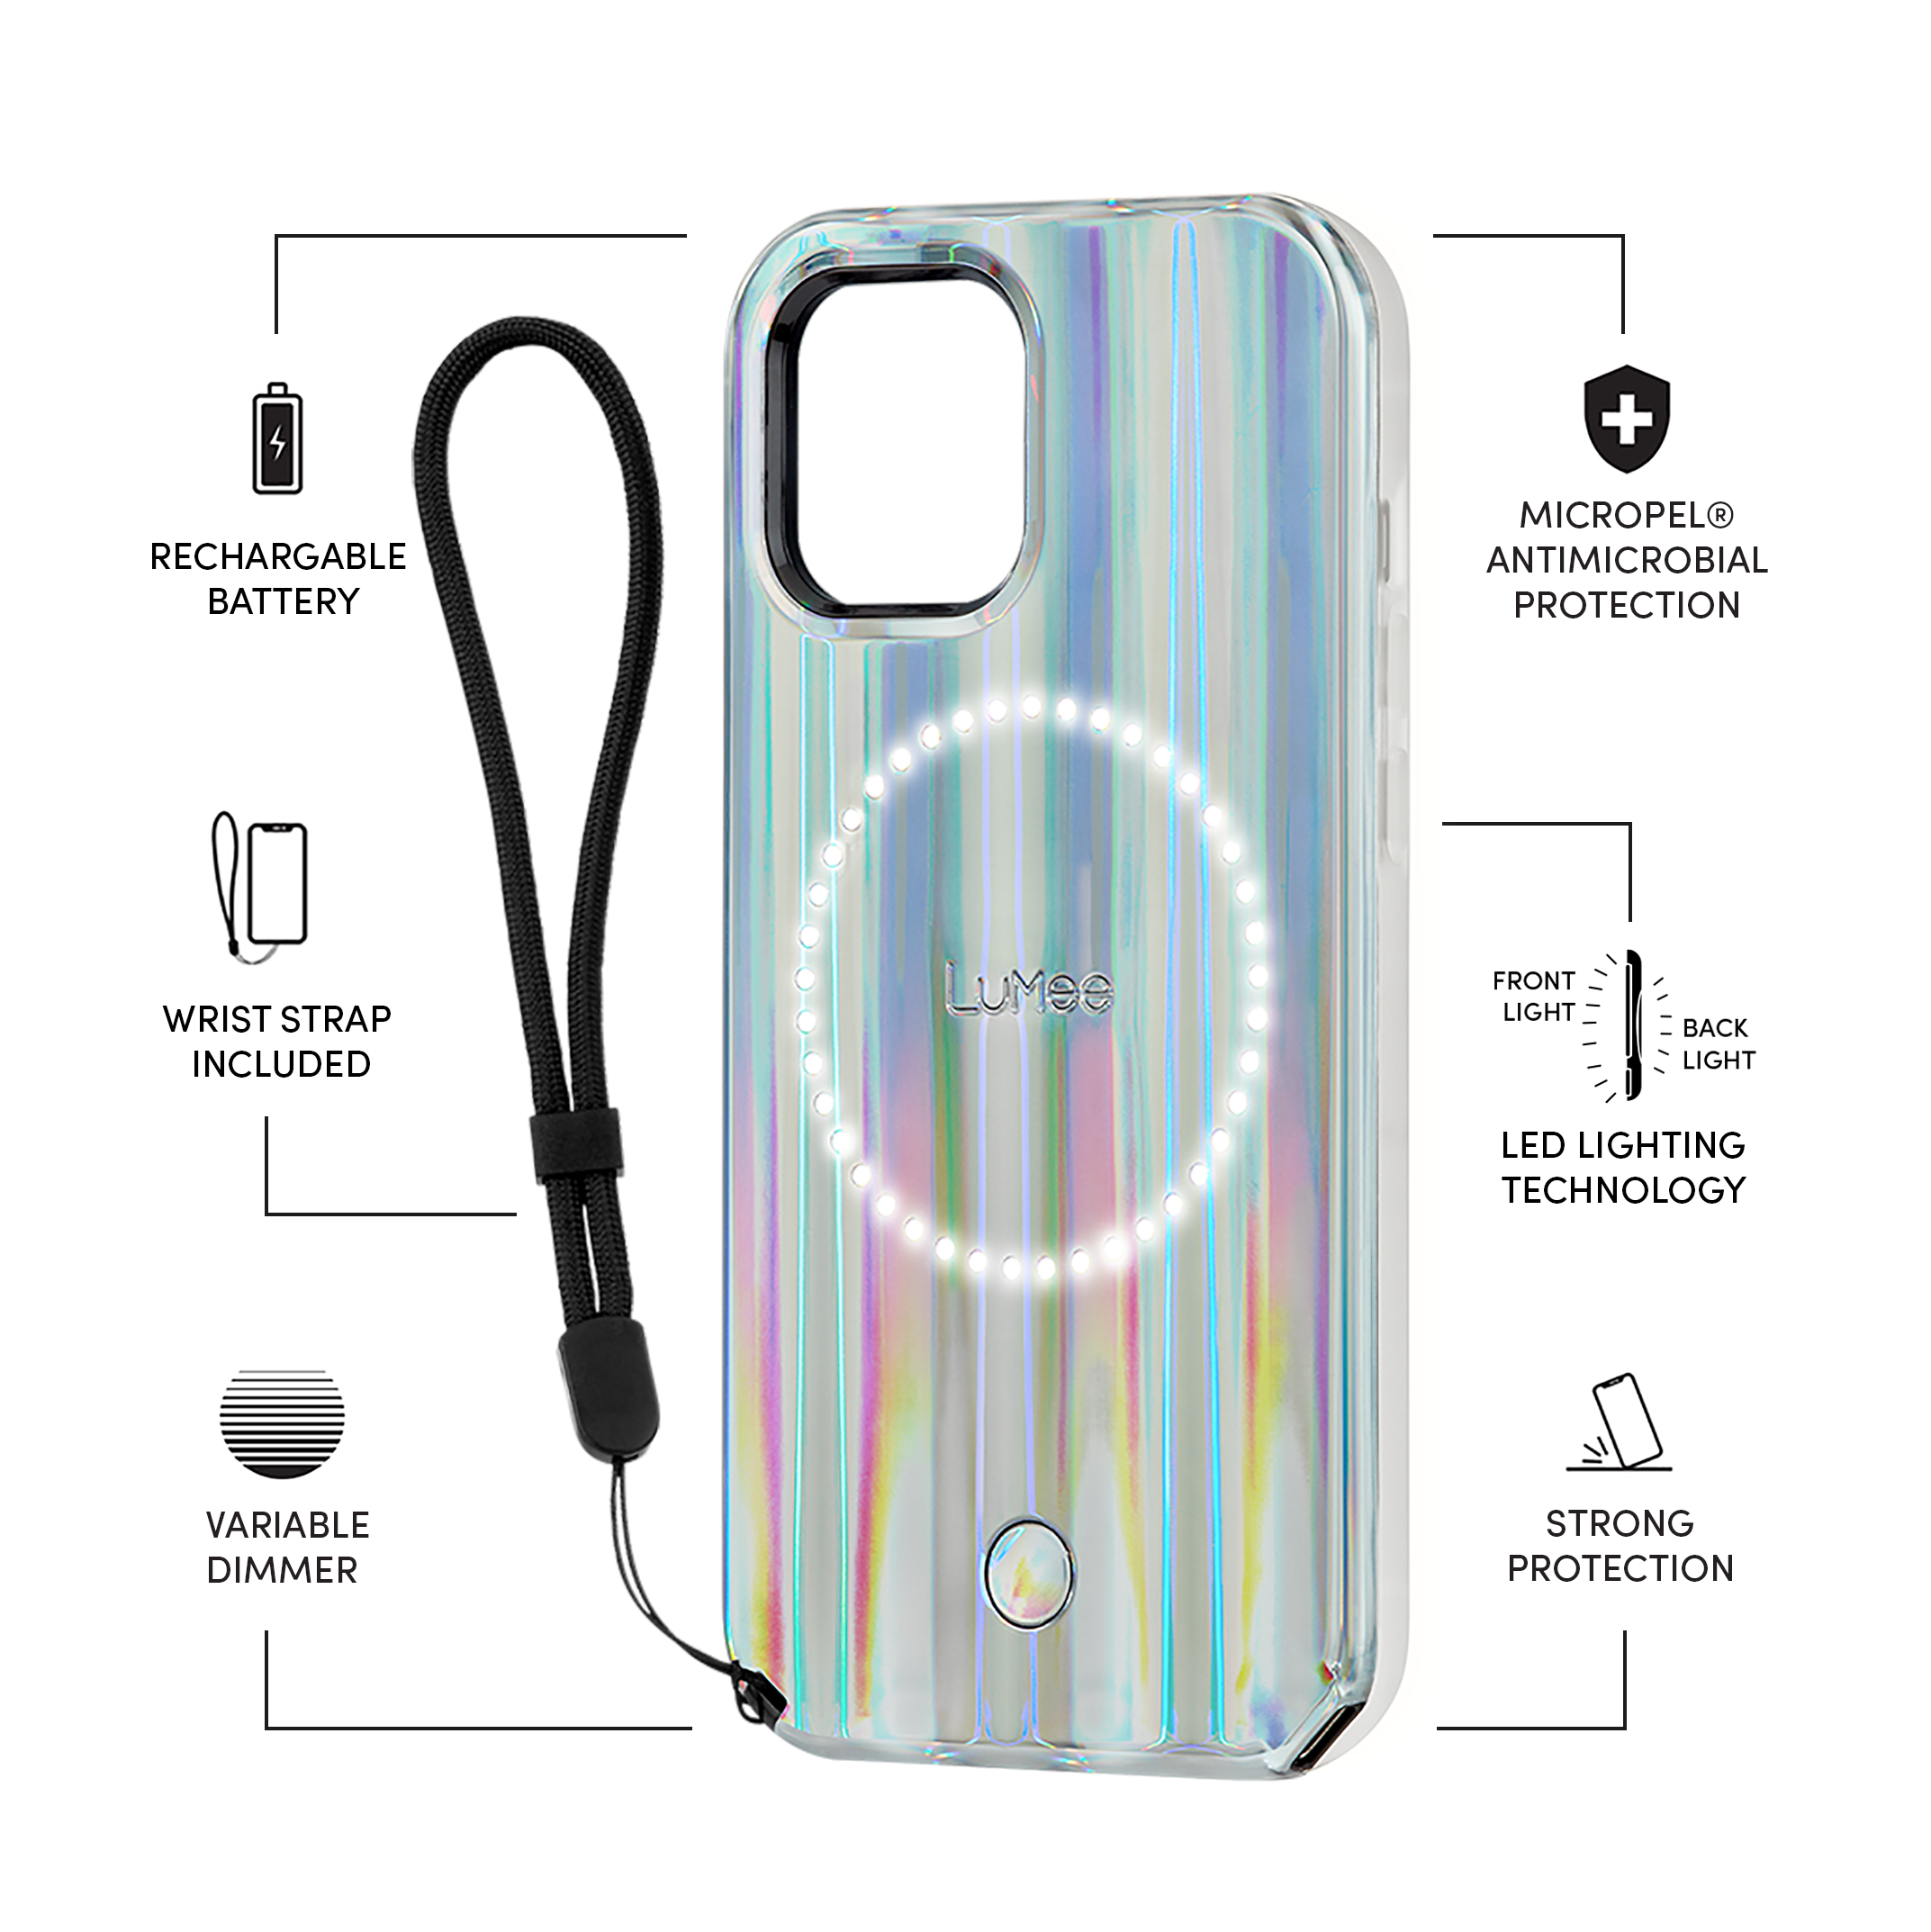 Lumee Halo Selfie Case for Apple iPhone 12 Mini - Studio-Like Front & Back Light w/ Variable Dimmer & Micropel AntiBacterial Protection Wireless Pass-Through Charging - Bolt